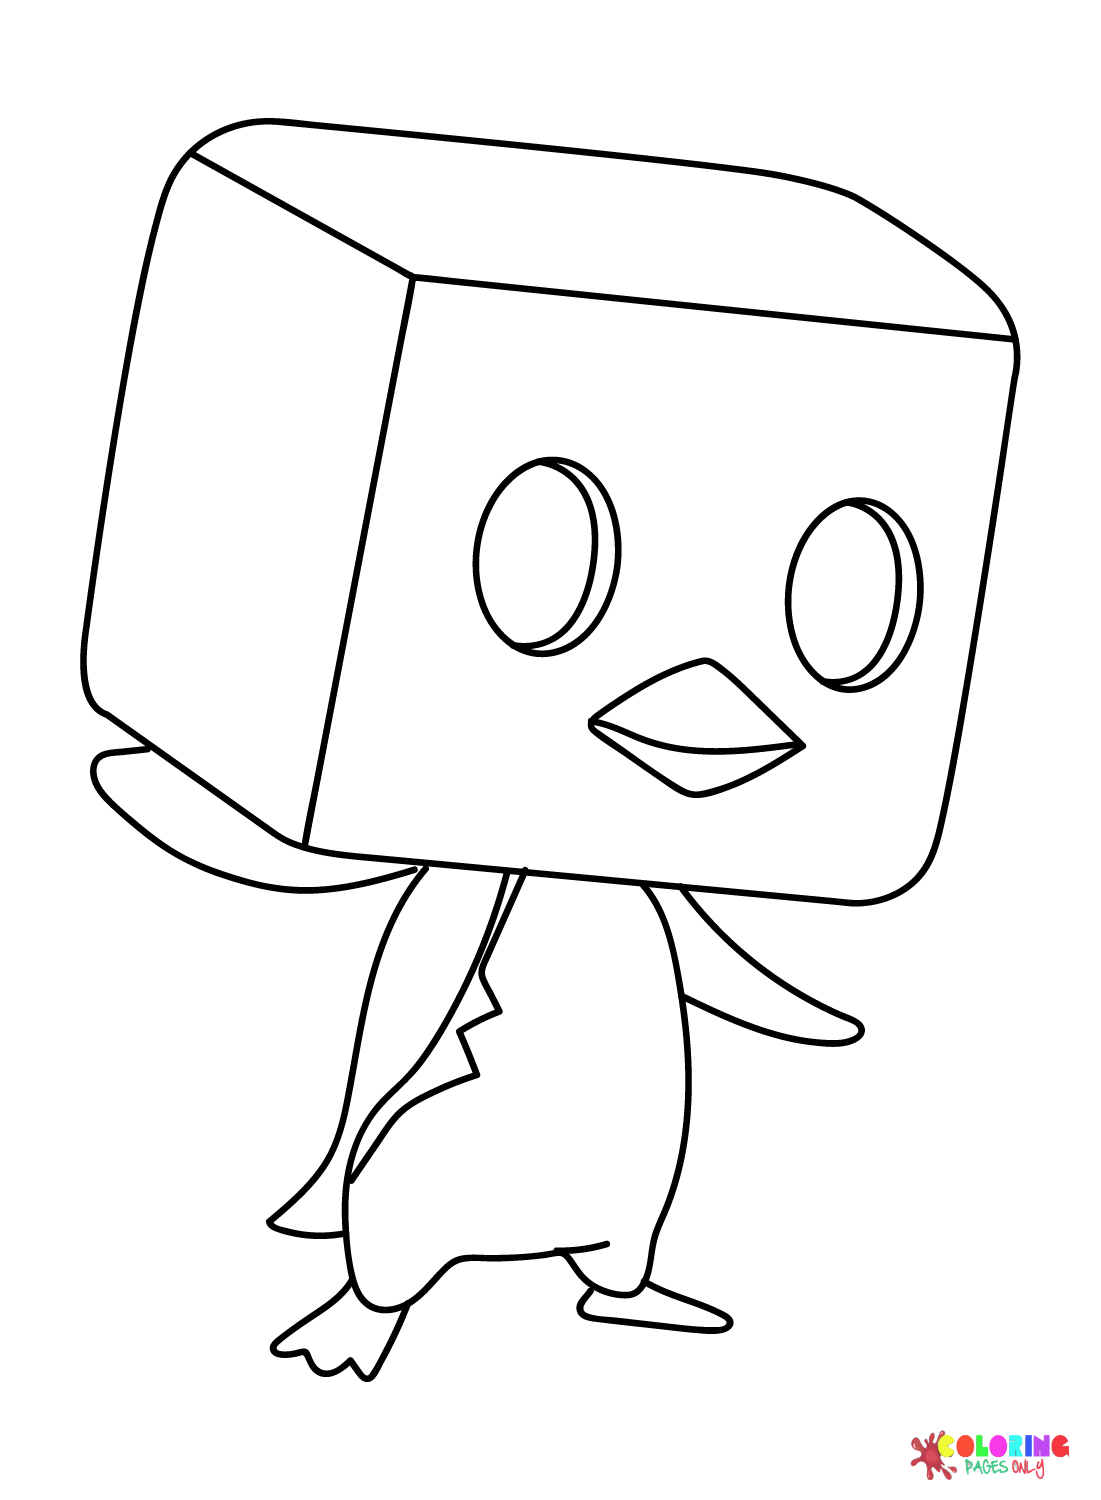 Eiscue Cartoon Coloring Page